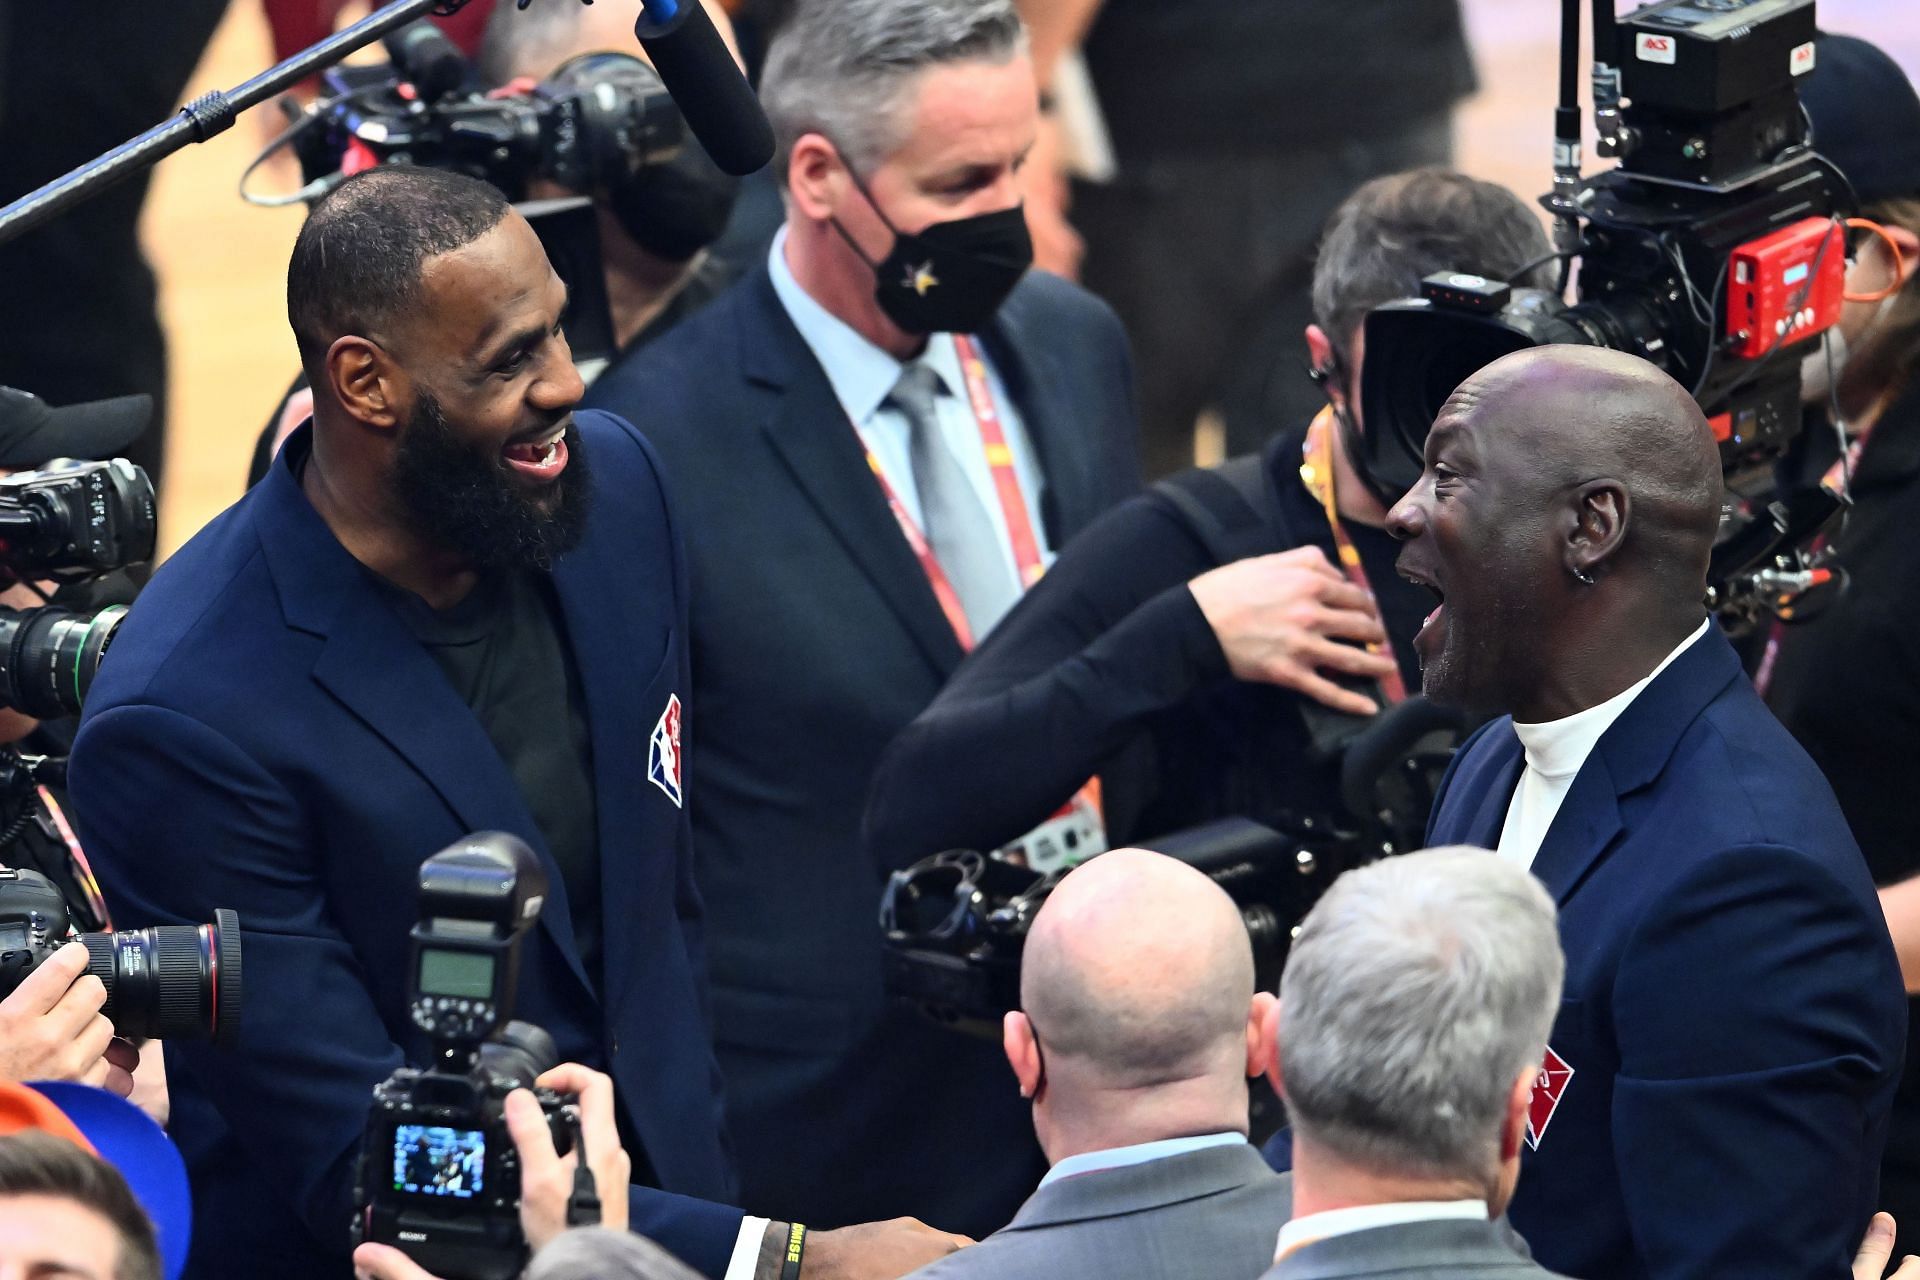 NBA legends LeBron James and Michael Jordan also have memes in common.